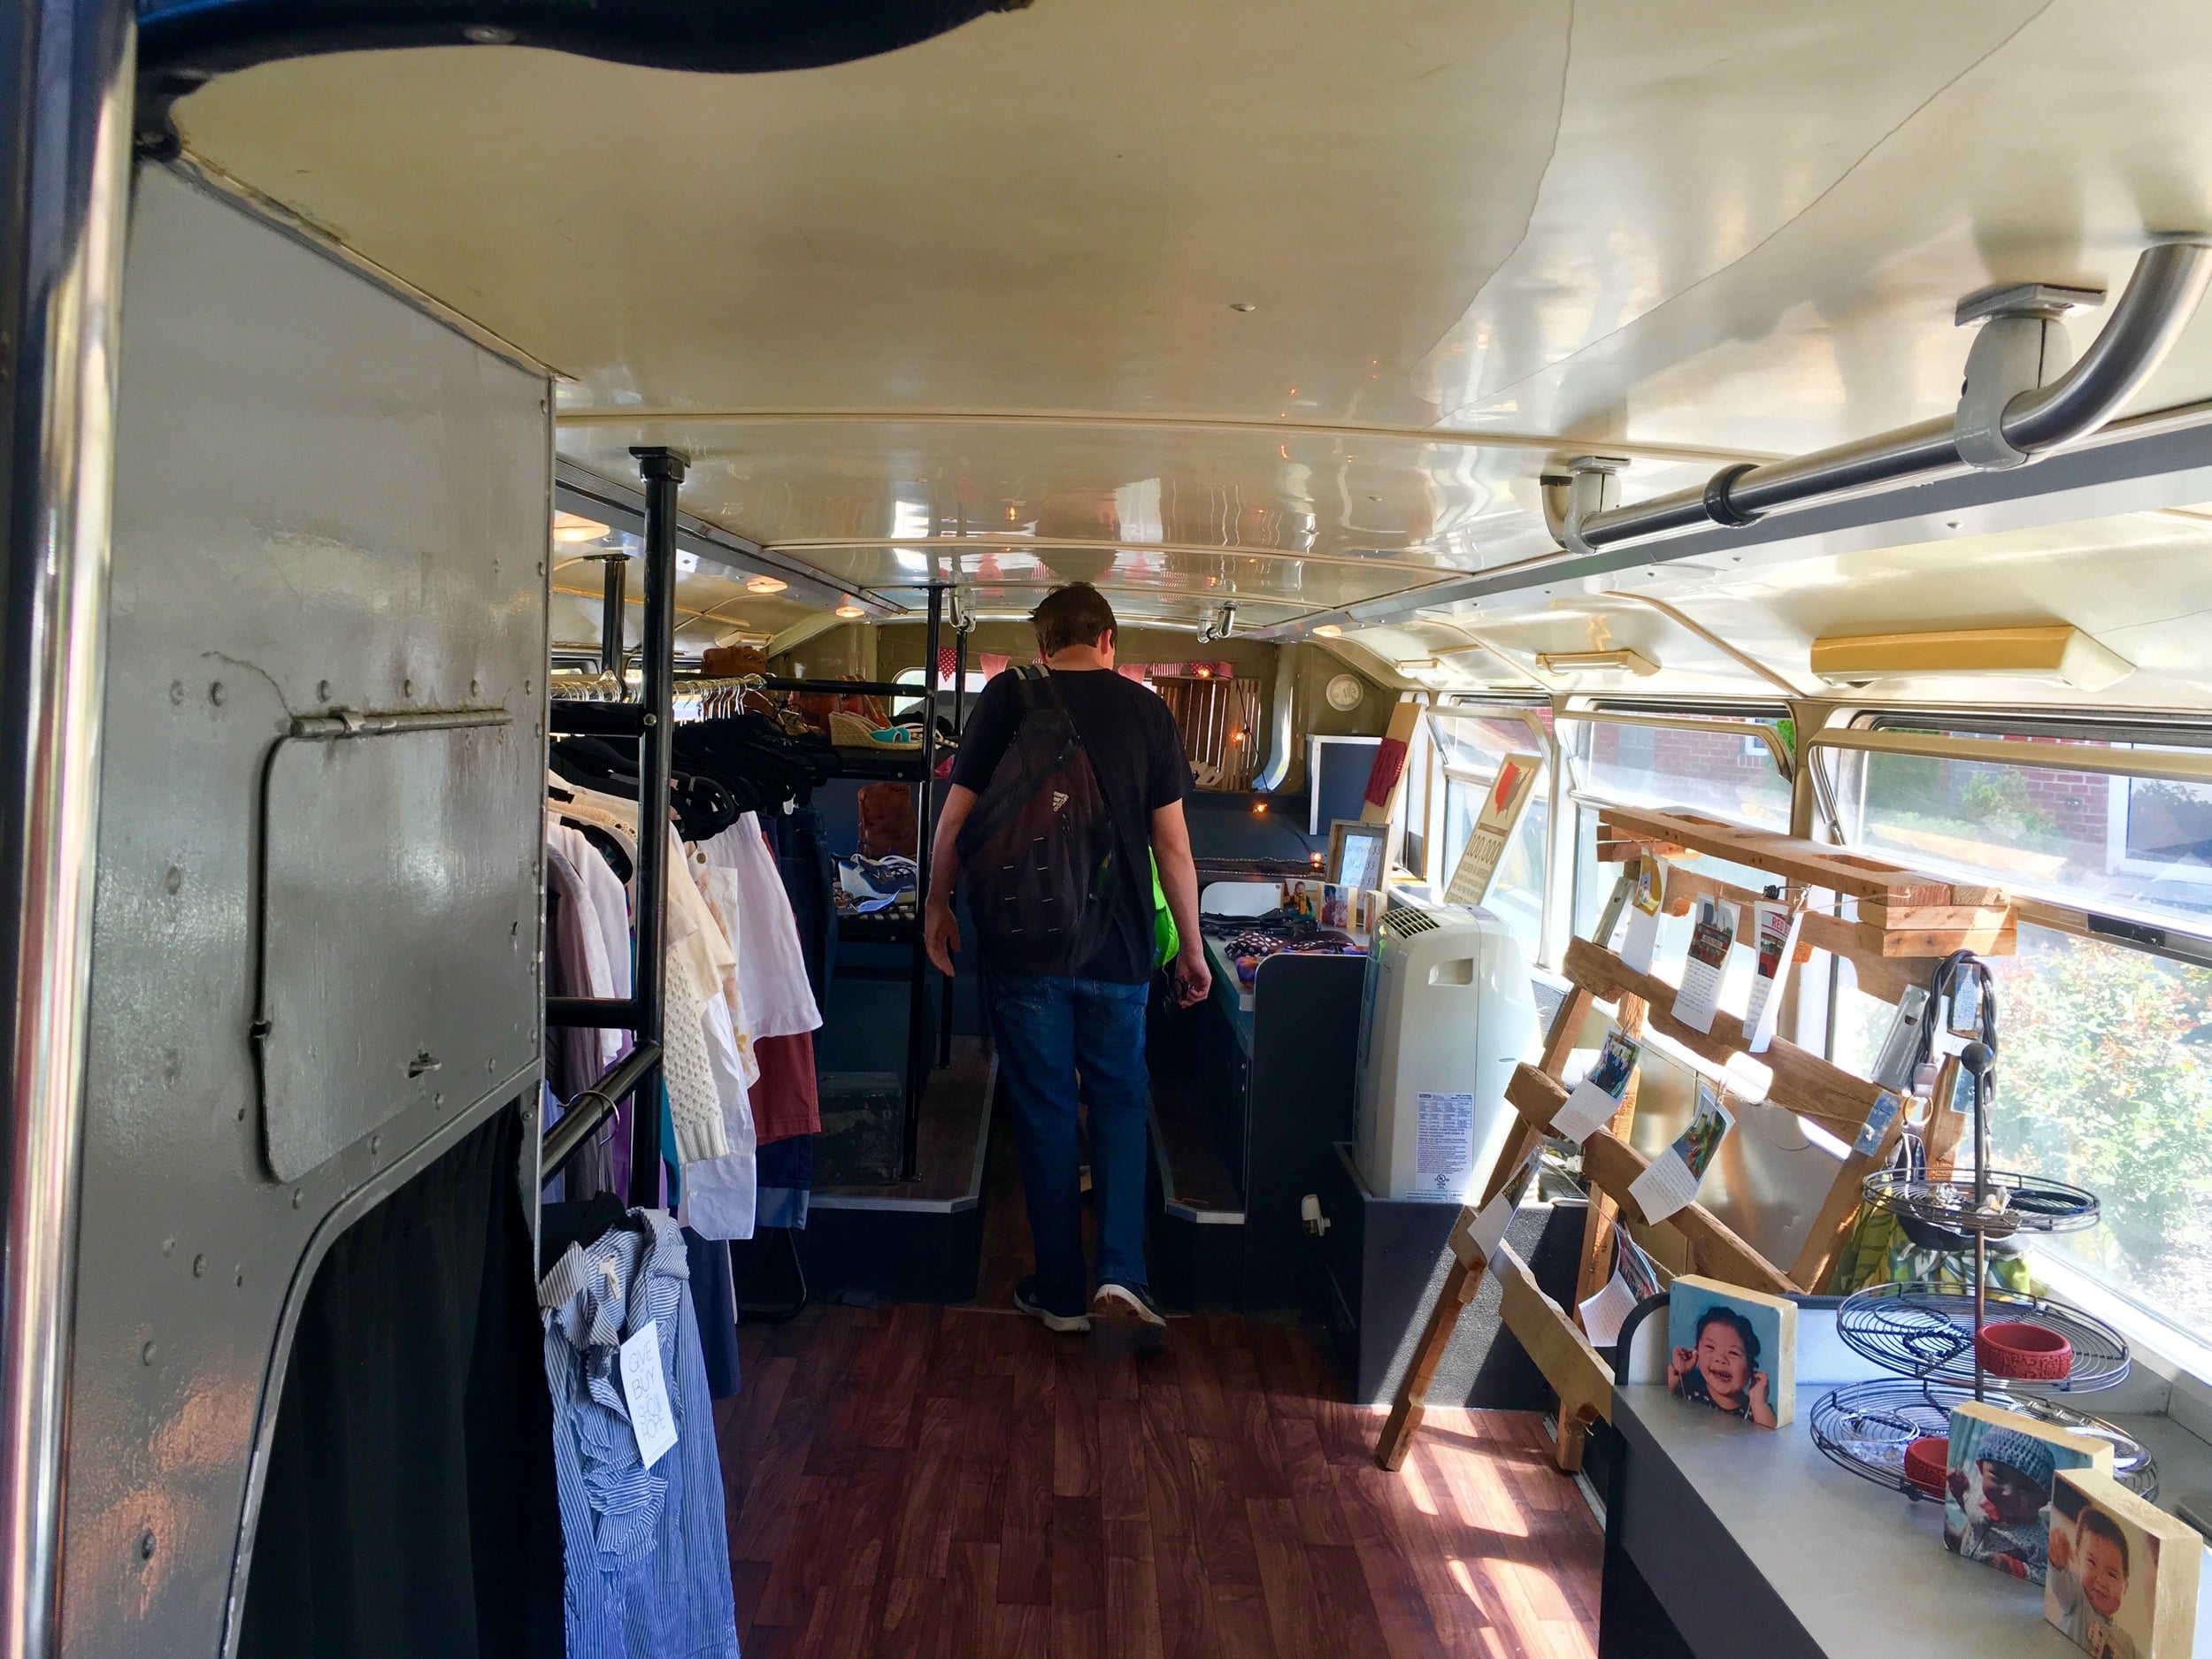 A view of the thrift store portion of the Red Bus. Photo courtesy of Christian Segers.